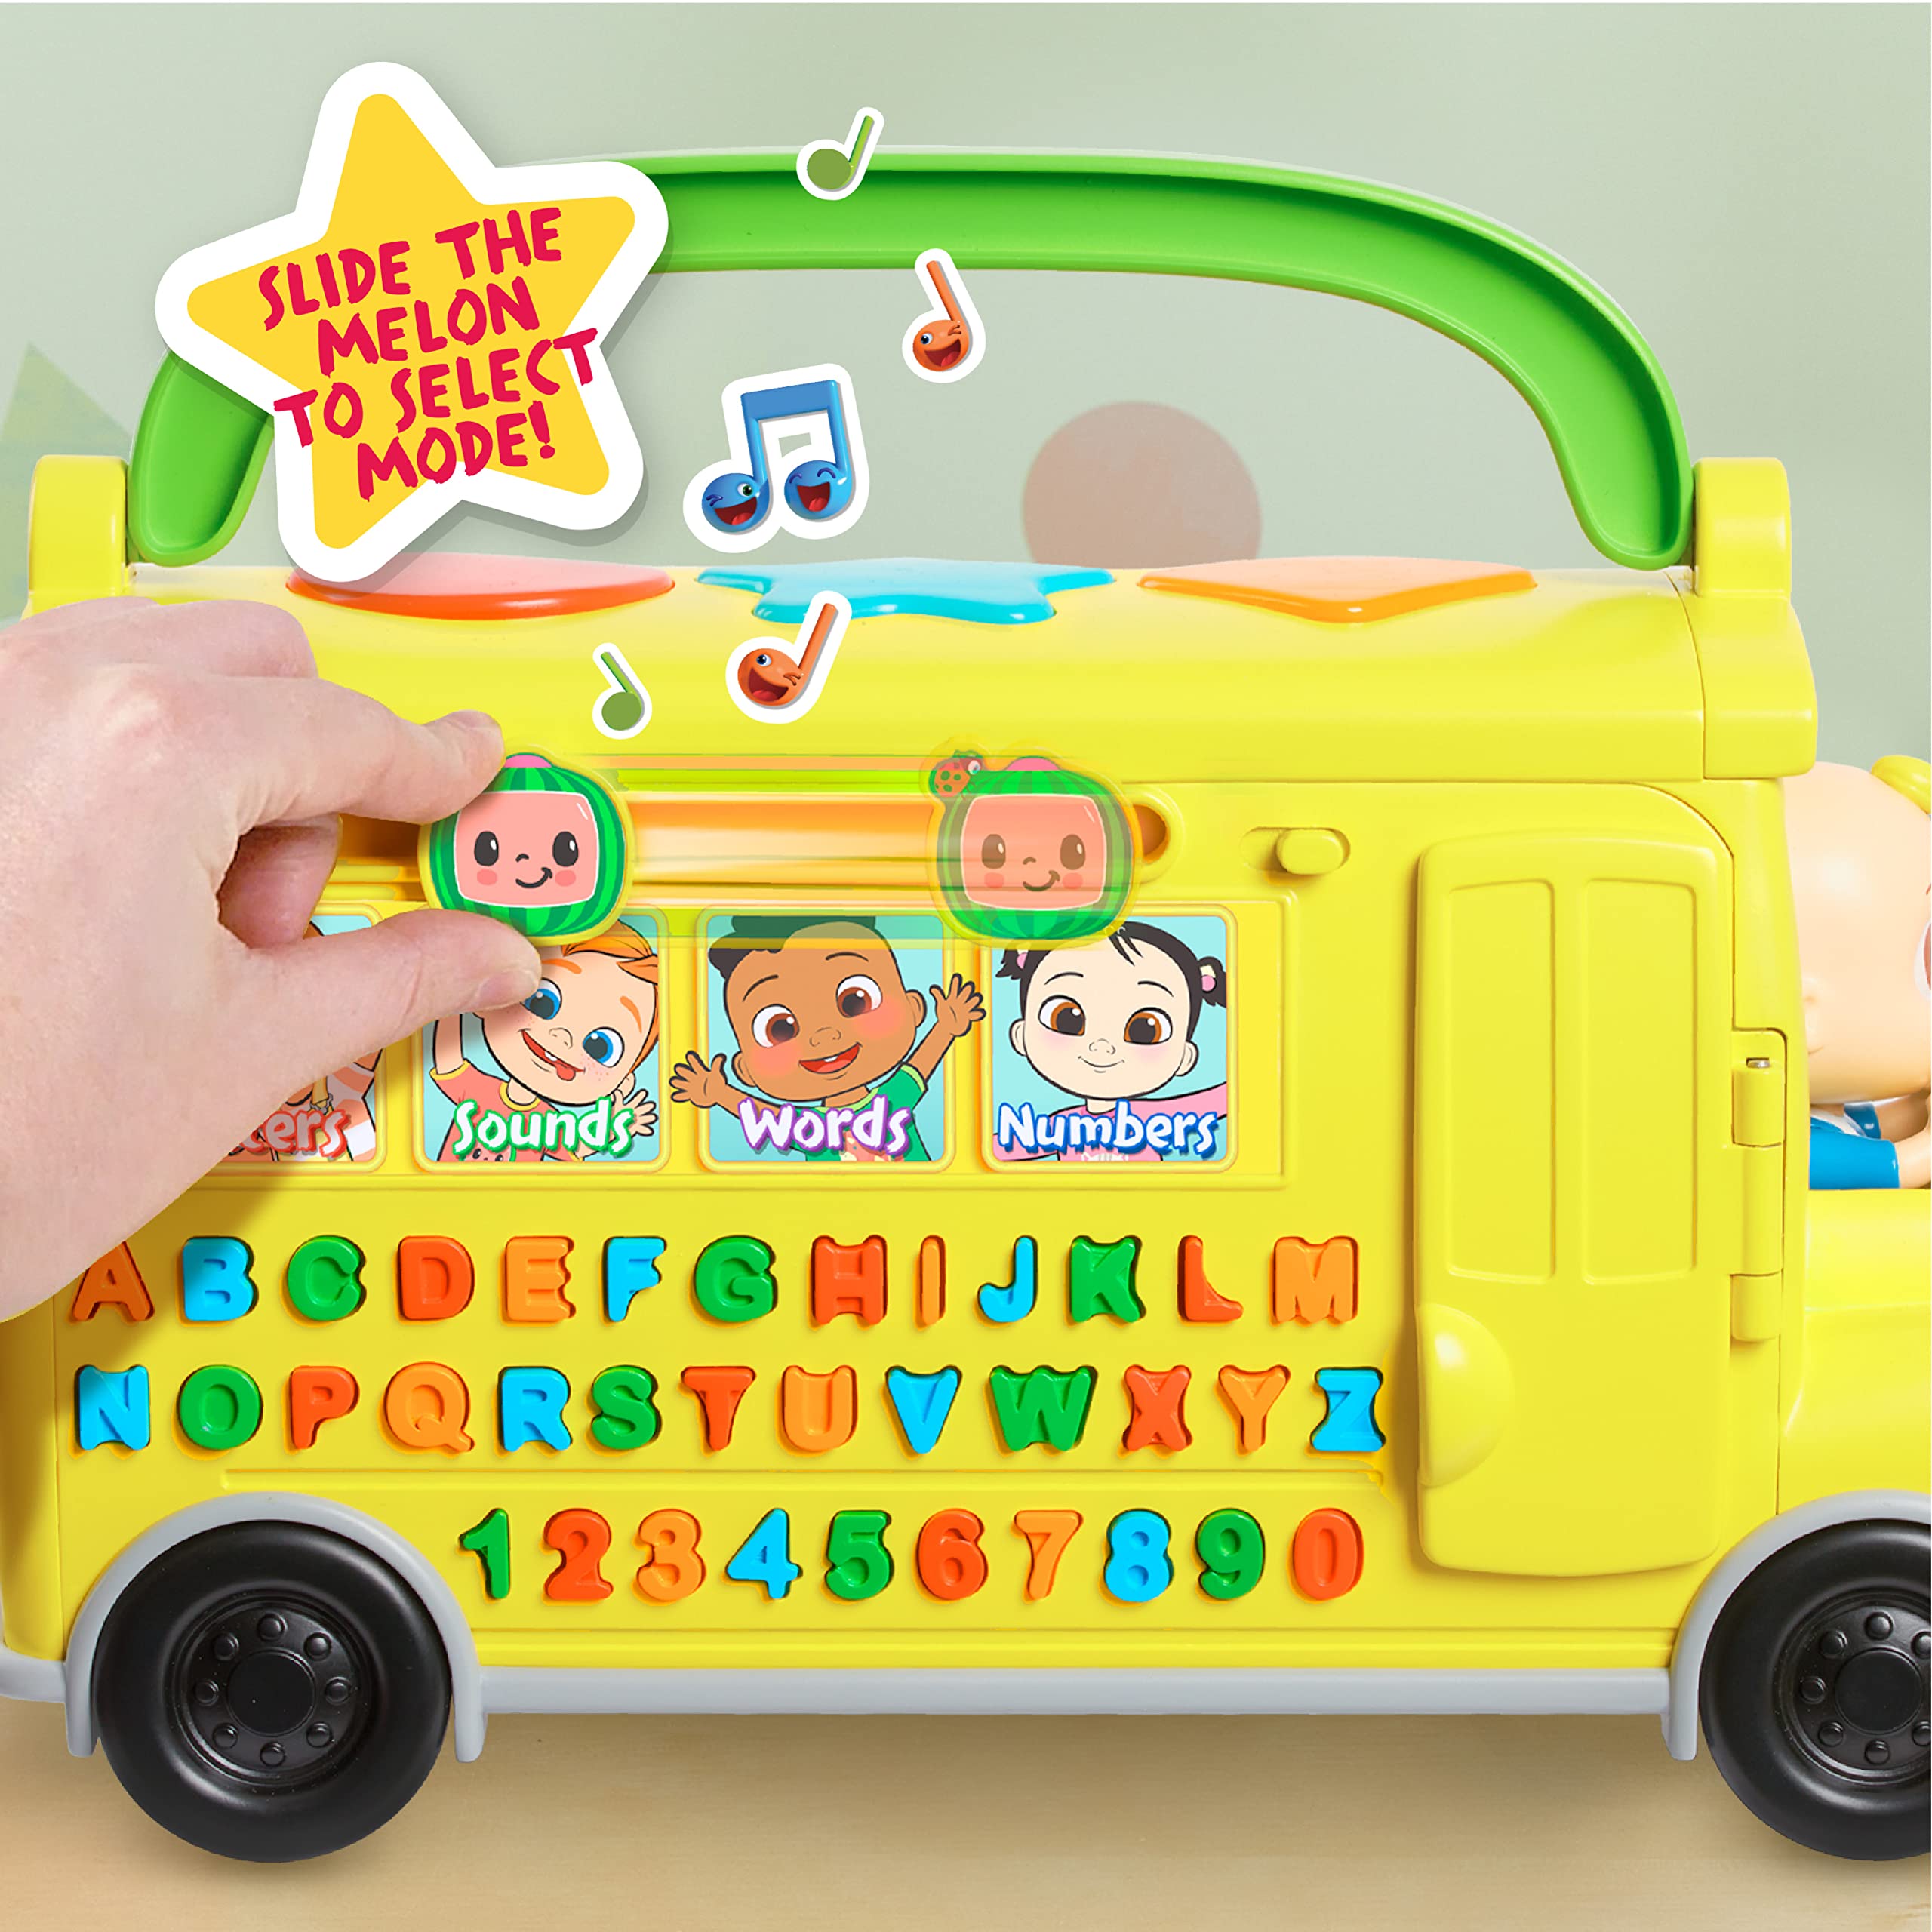 CoComelon Musical Learning Bus, Number and Letter Recognition, Phonetics, Yellow School Bus Toy Plays ABCs and Wheels on the Bus, Officially Licensed Kids Toys for Ages 18 Month by Just Play